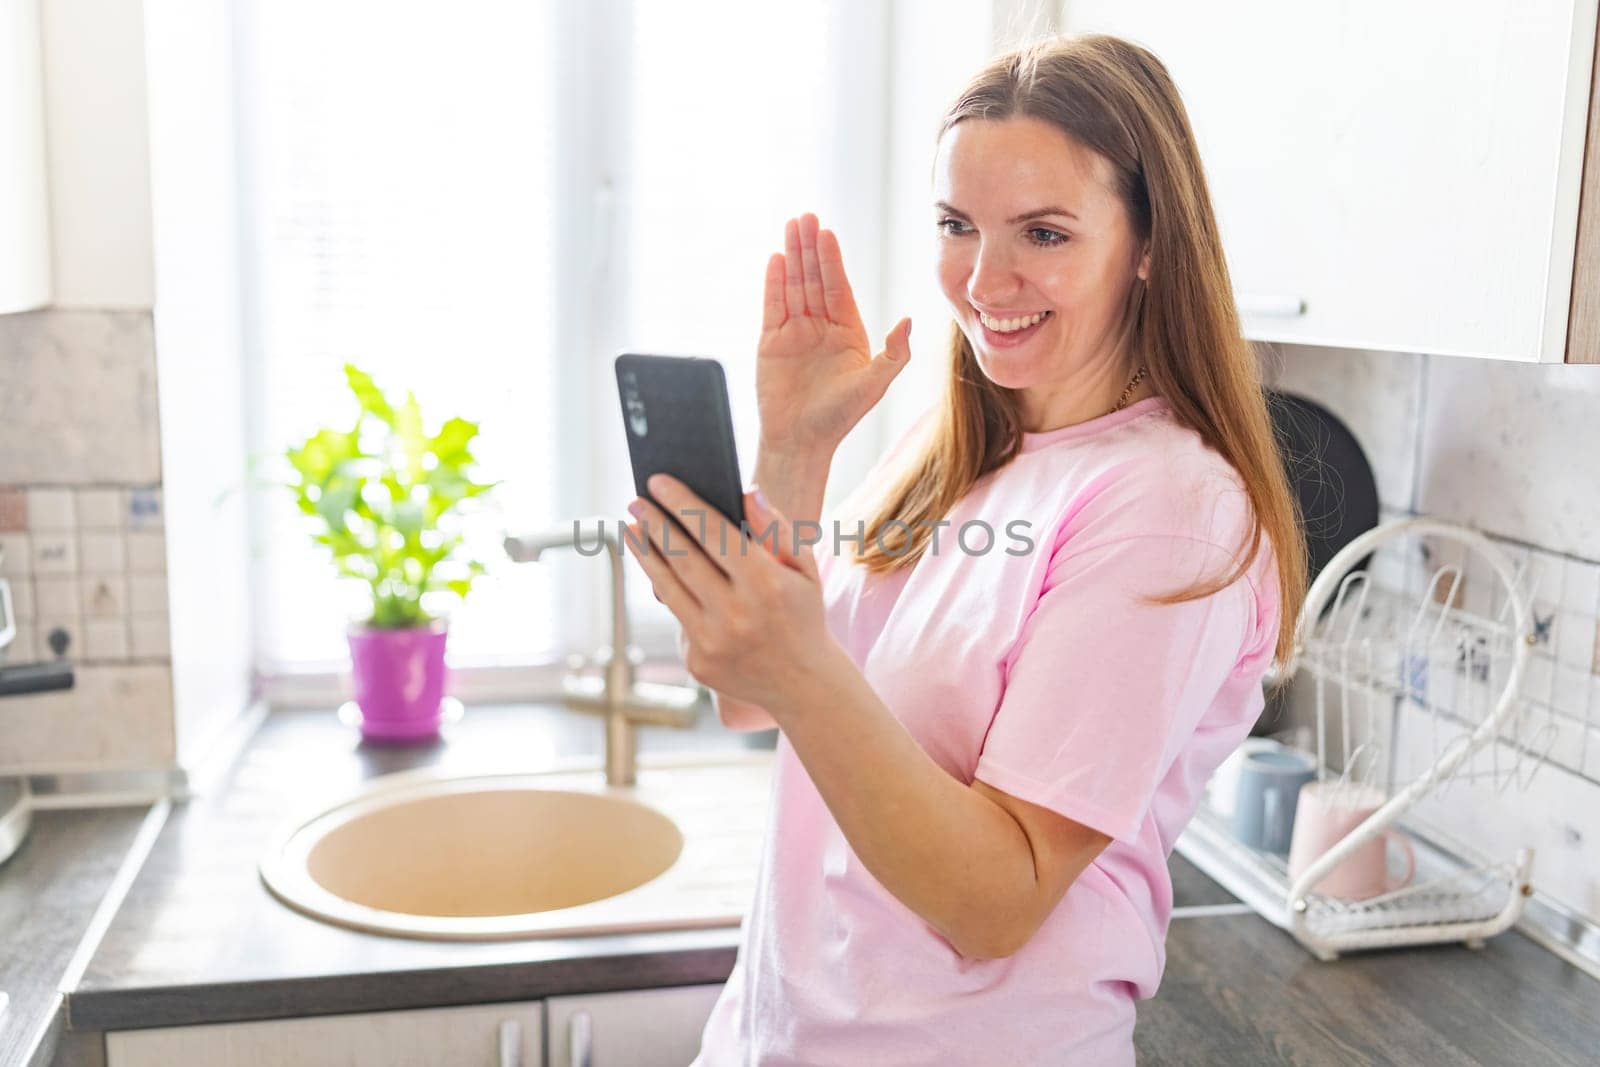 Happy woman in pink t-shirt waving while having a video call on her smartphone in a bright, sunny kitchen.